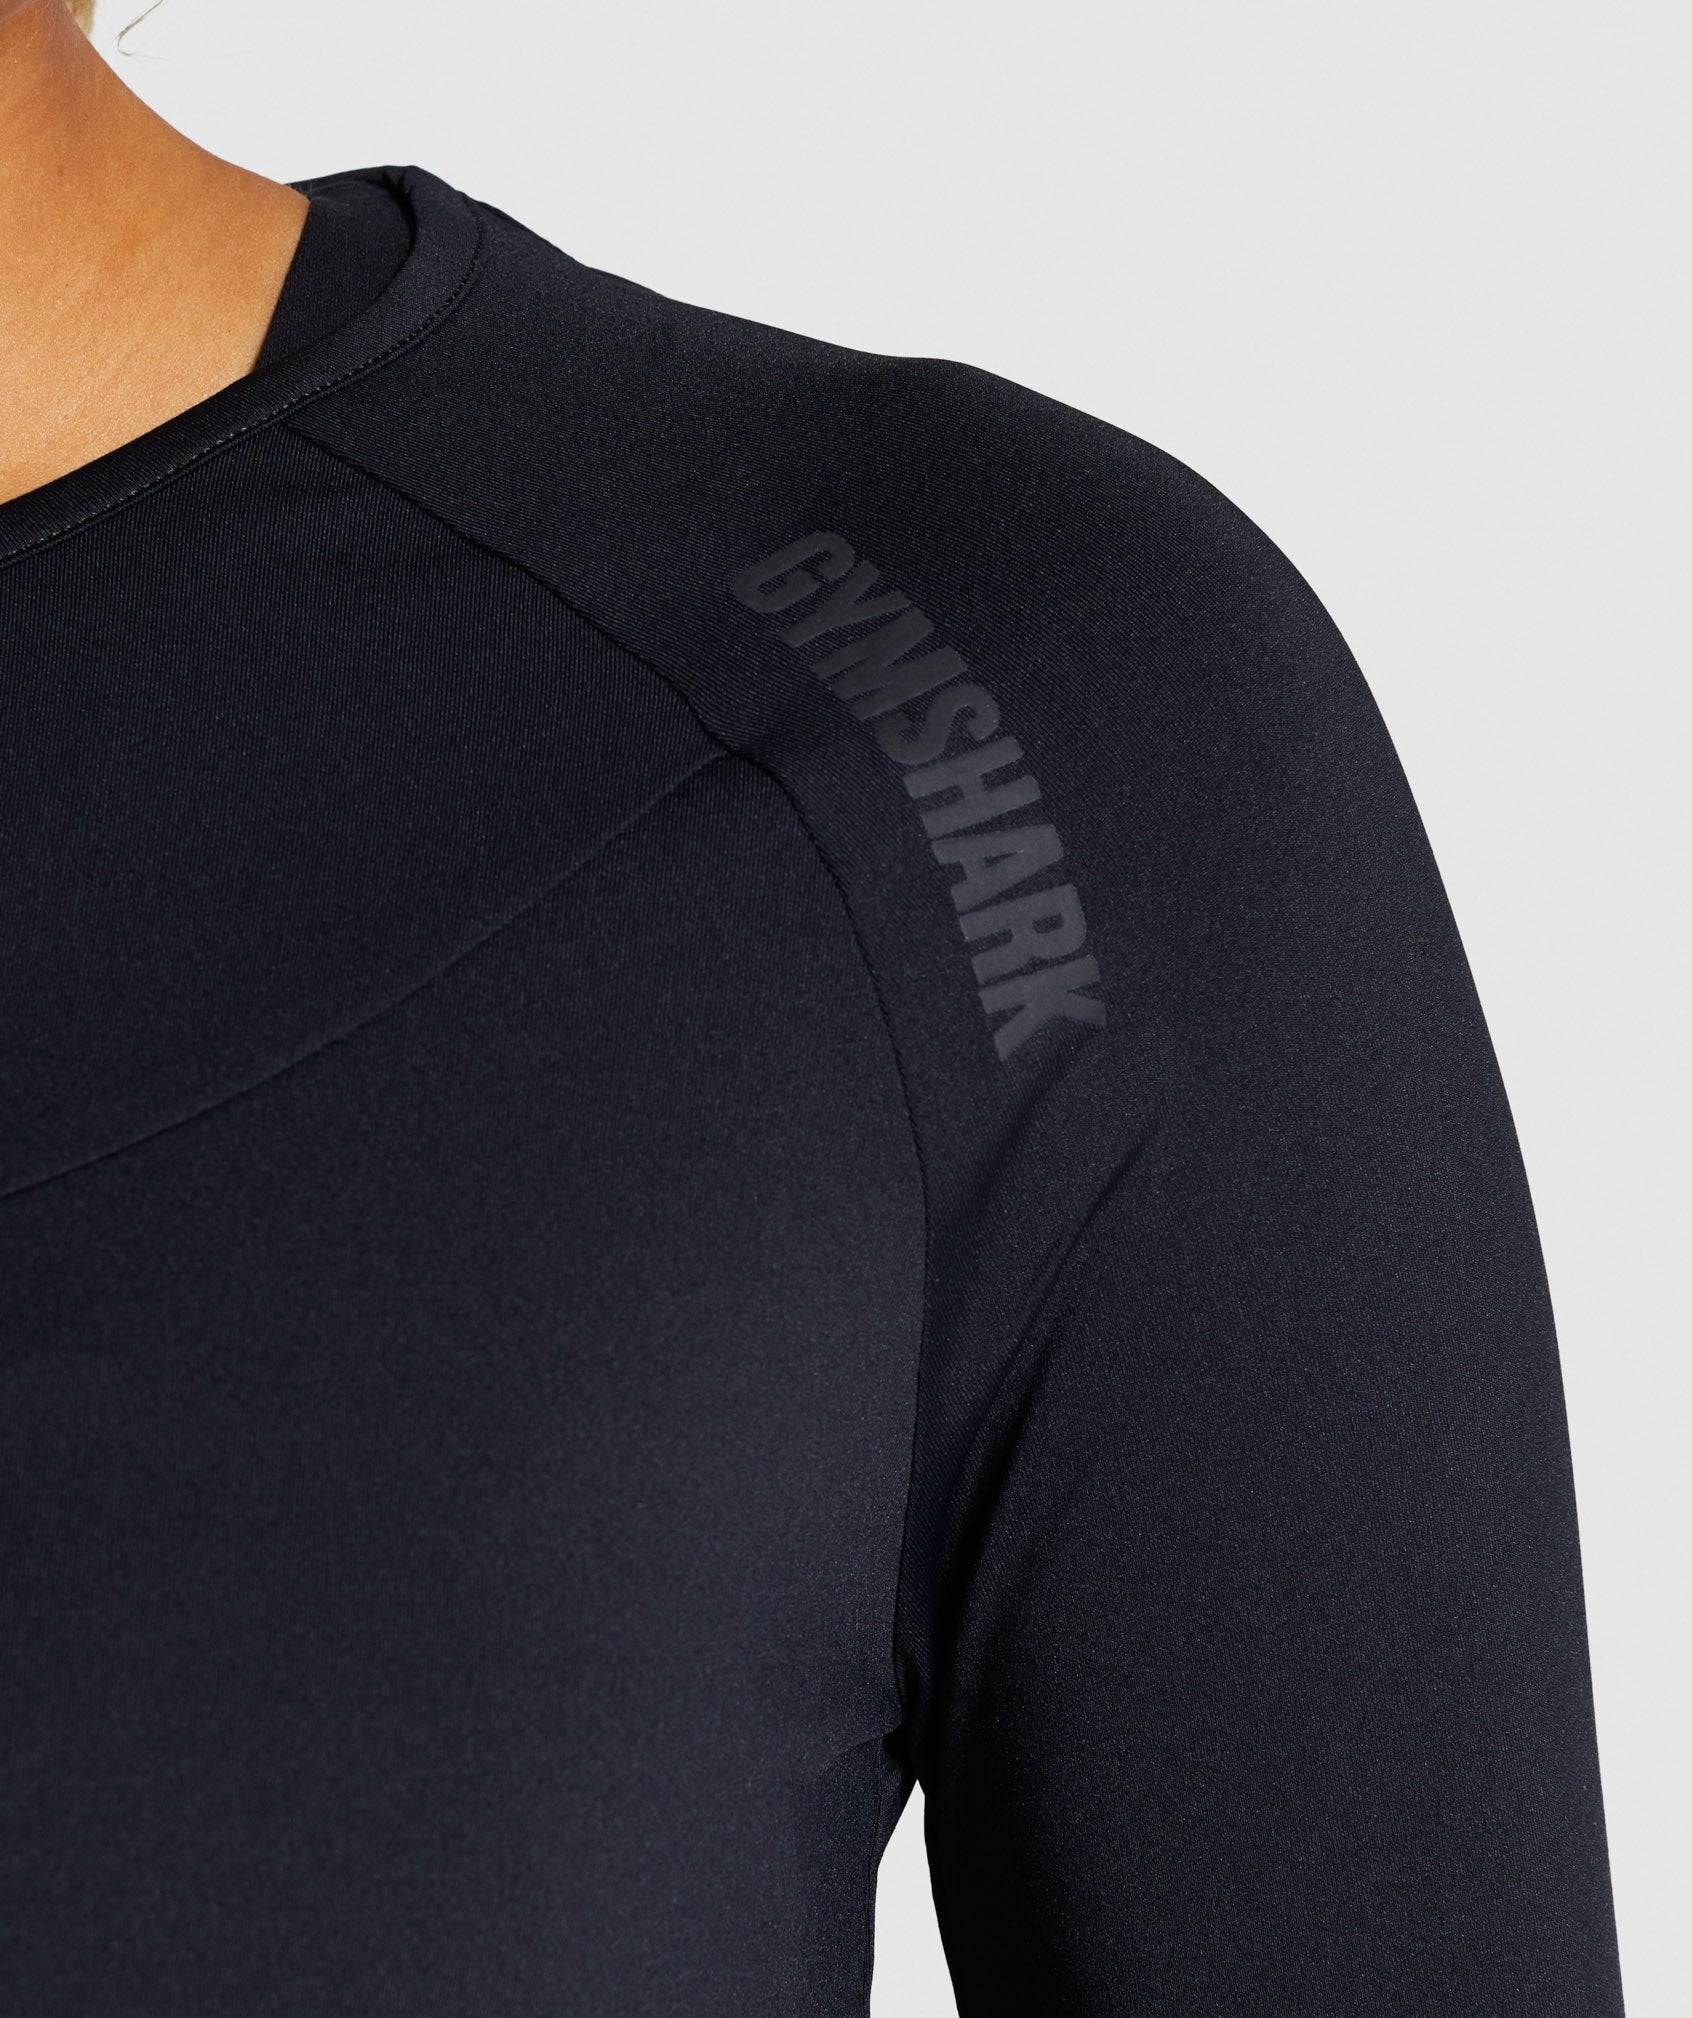 Captivate Long Sleeve Top in Black - view 6